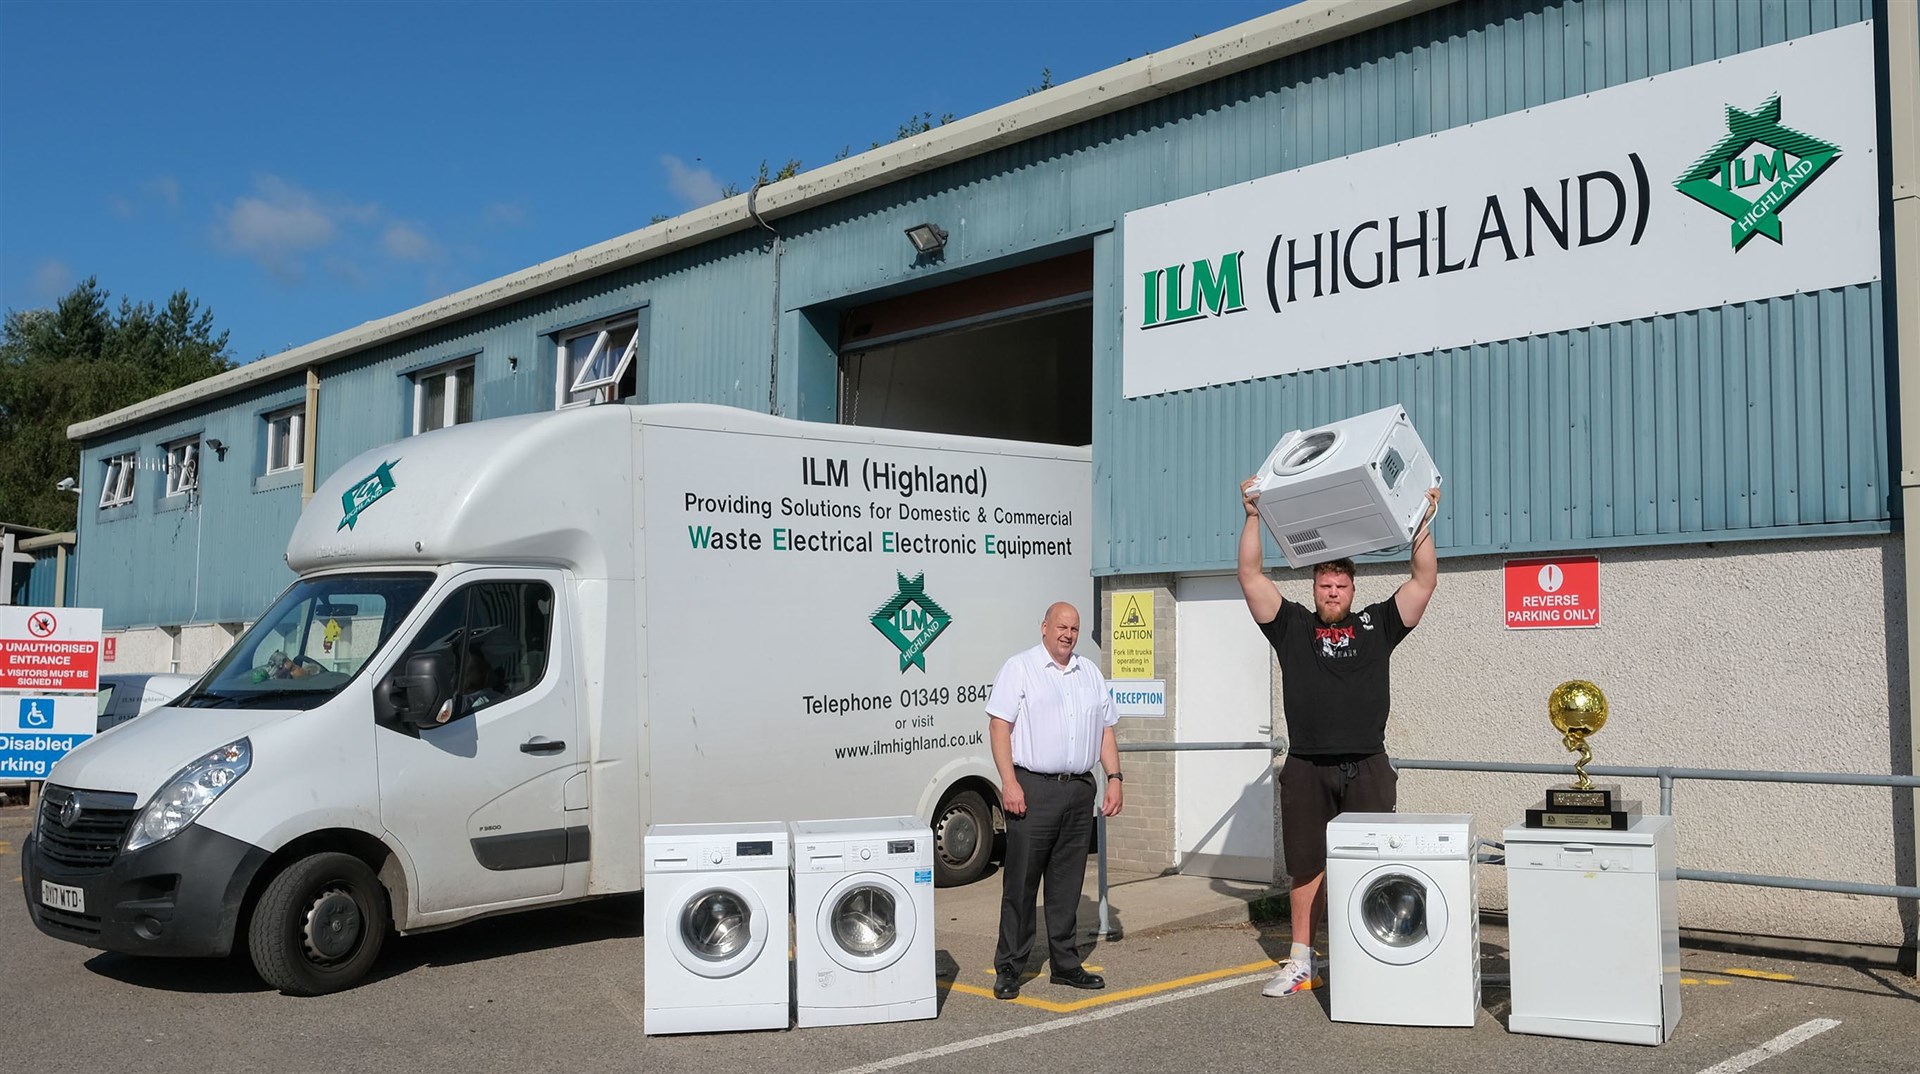 World’s Strongest Man Tom Stoltman (right) and Martin MacLeod celebrate ILM Highland’s environmental and social achievements over the last 12 months.